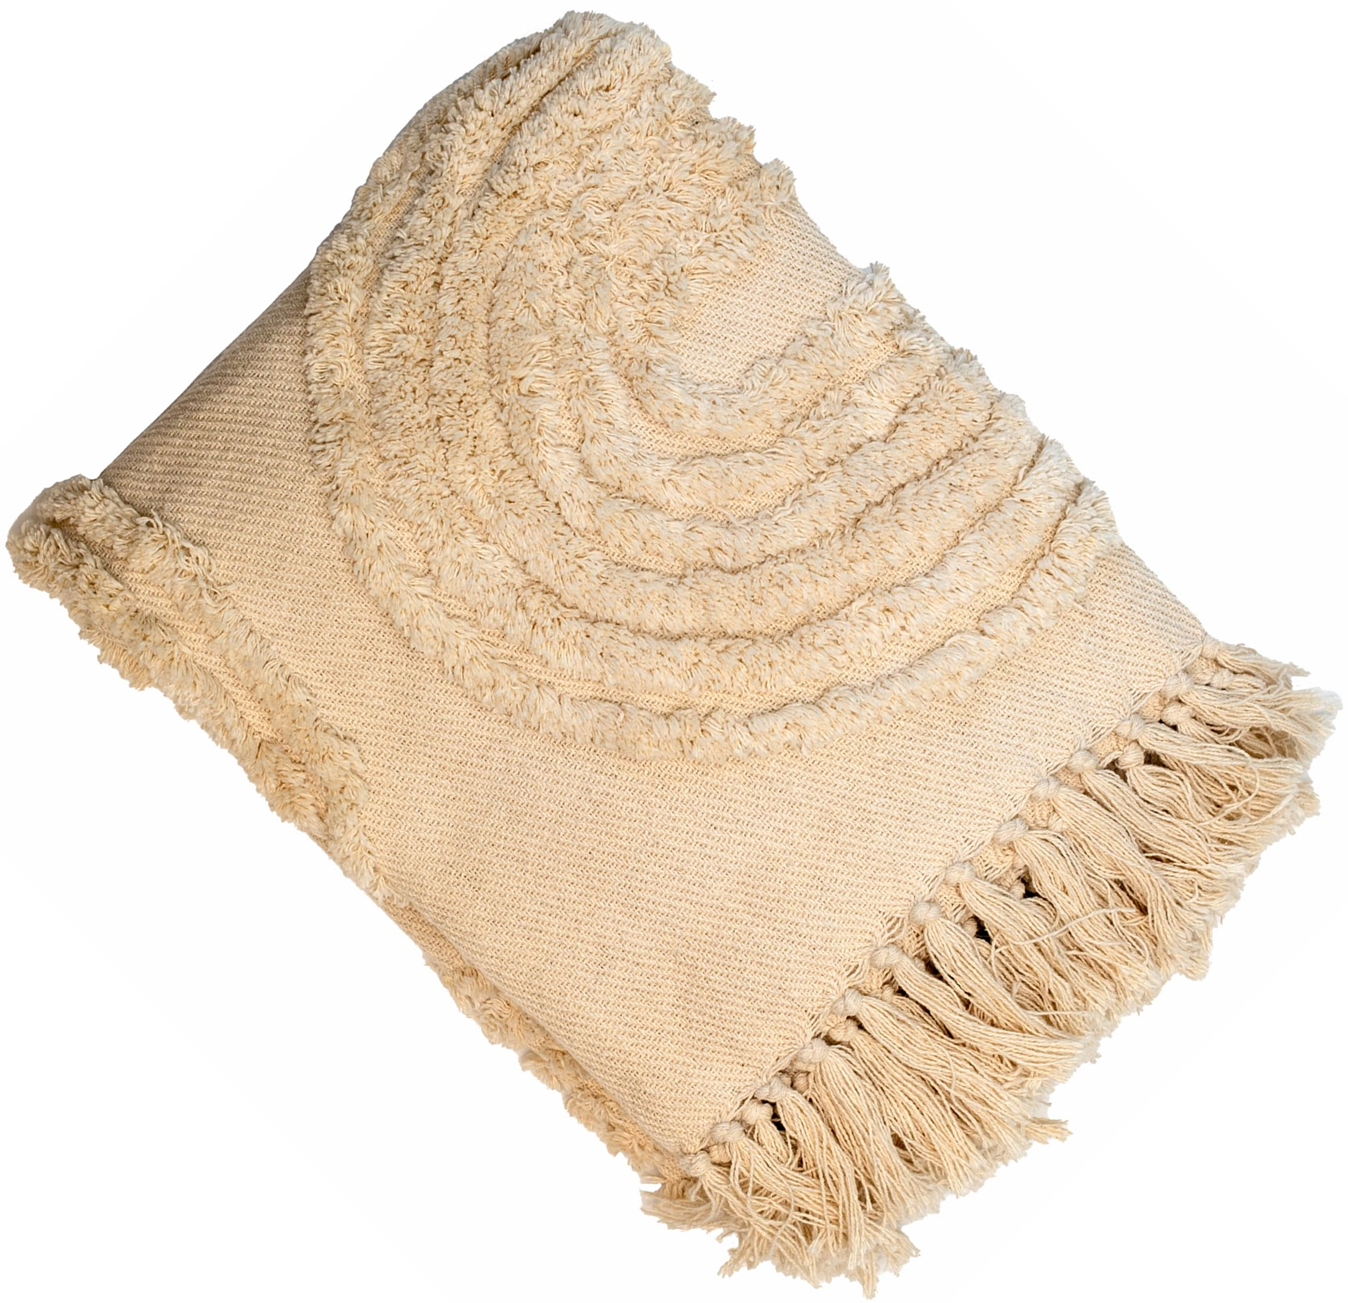 cotton tufted throw natural 130 x 180

Size: 130 x 180 cm